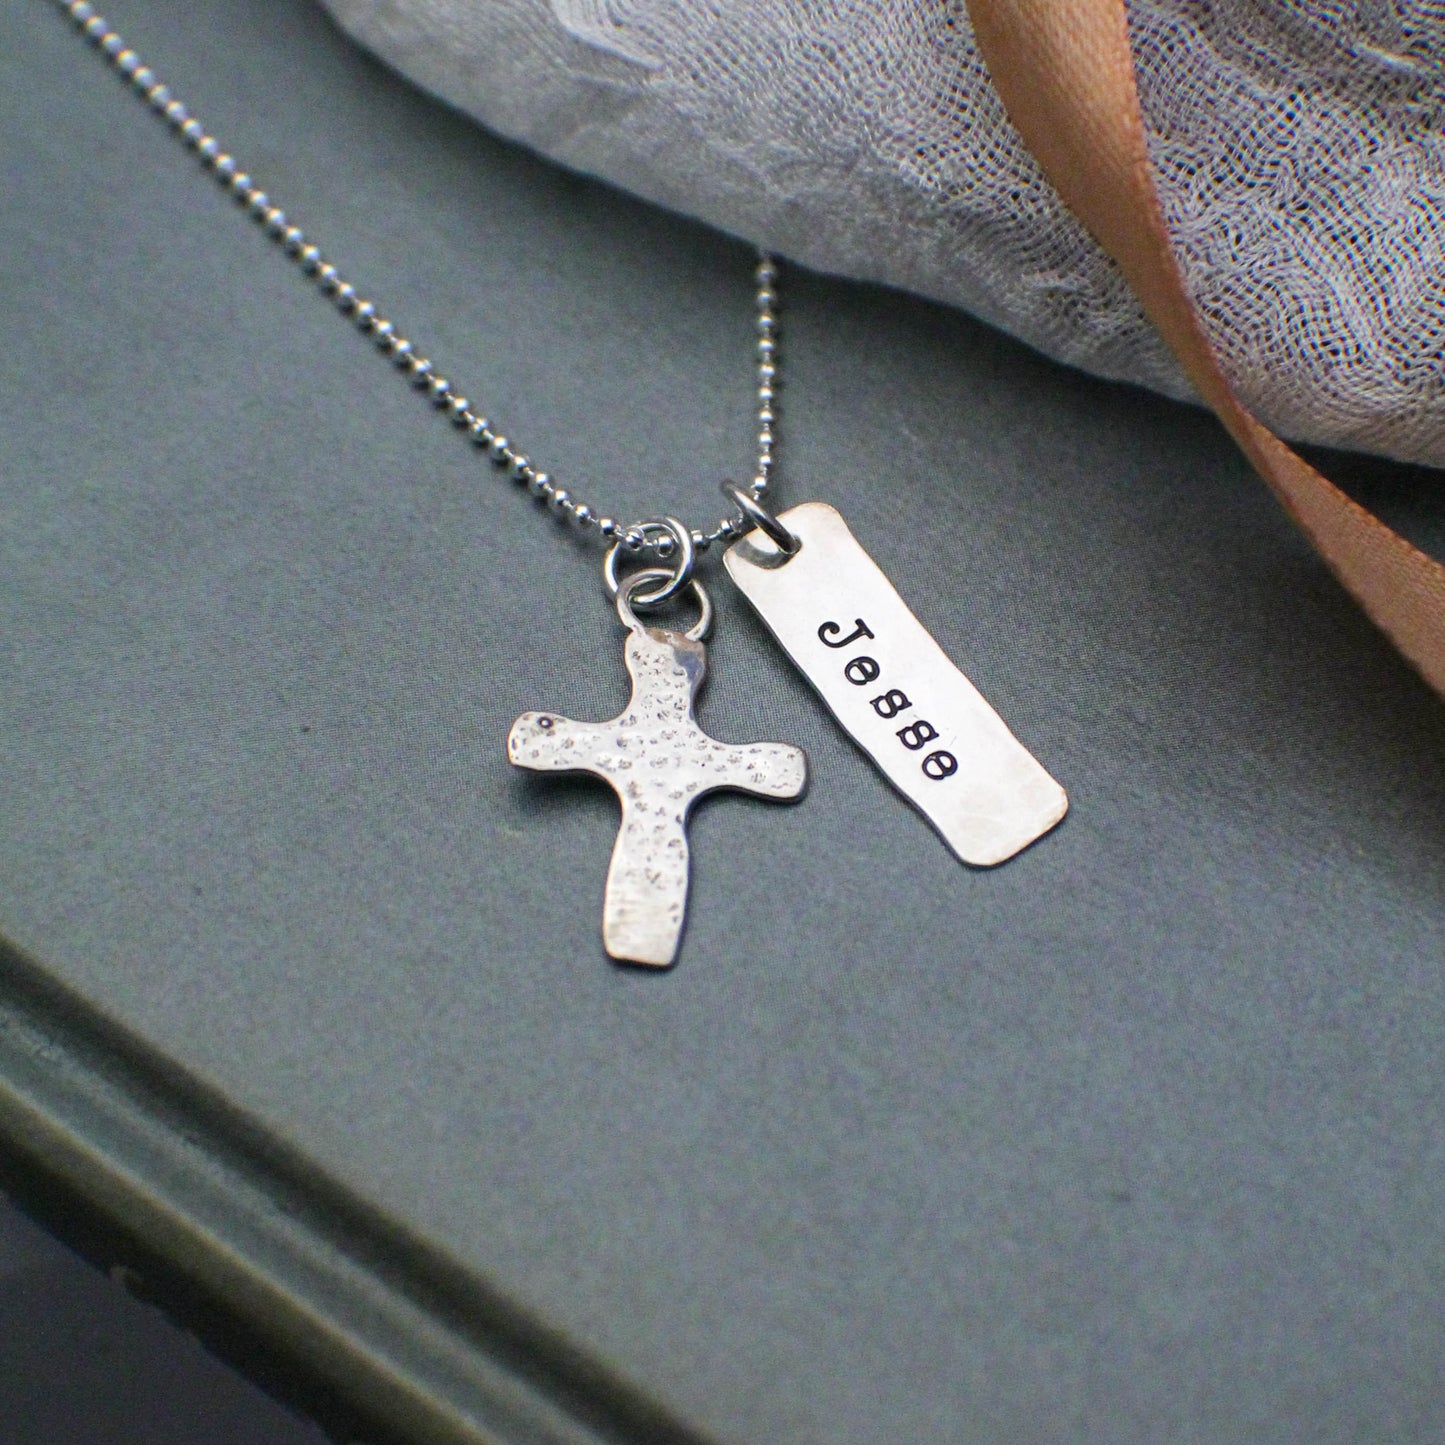 Personalized Boys Cross Necklace, Boys Confirmation or First Communion Gift, Hammered Silver Cross with Name Necklace for Boys, Hand Stamped